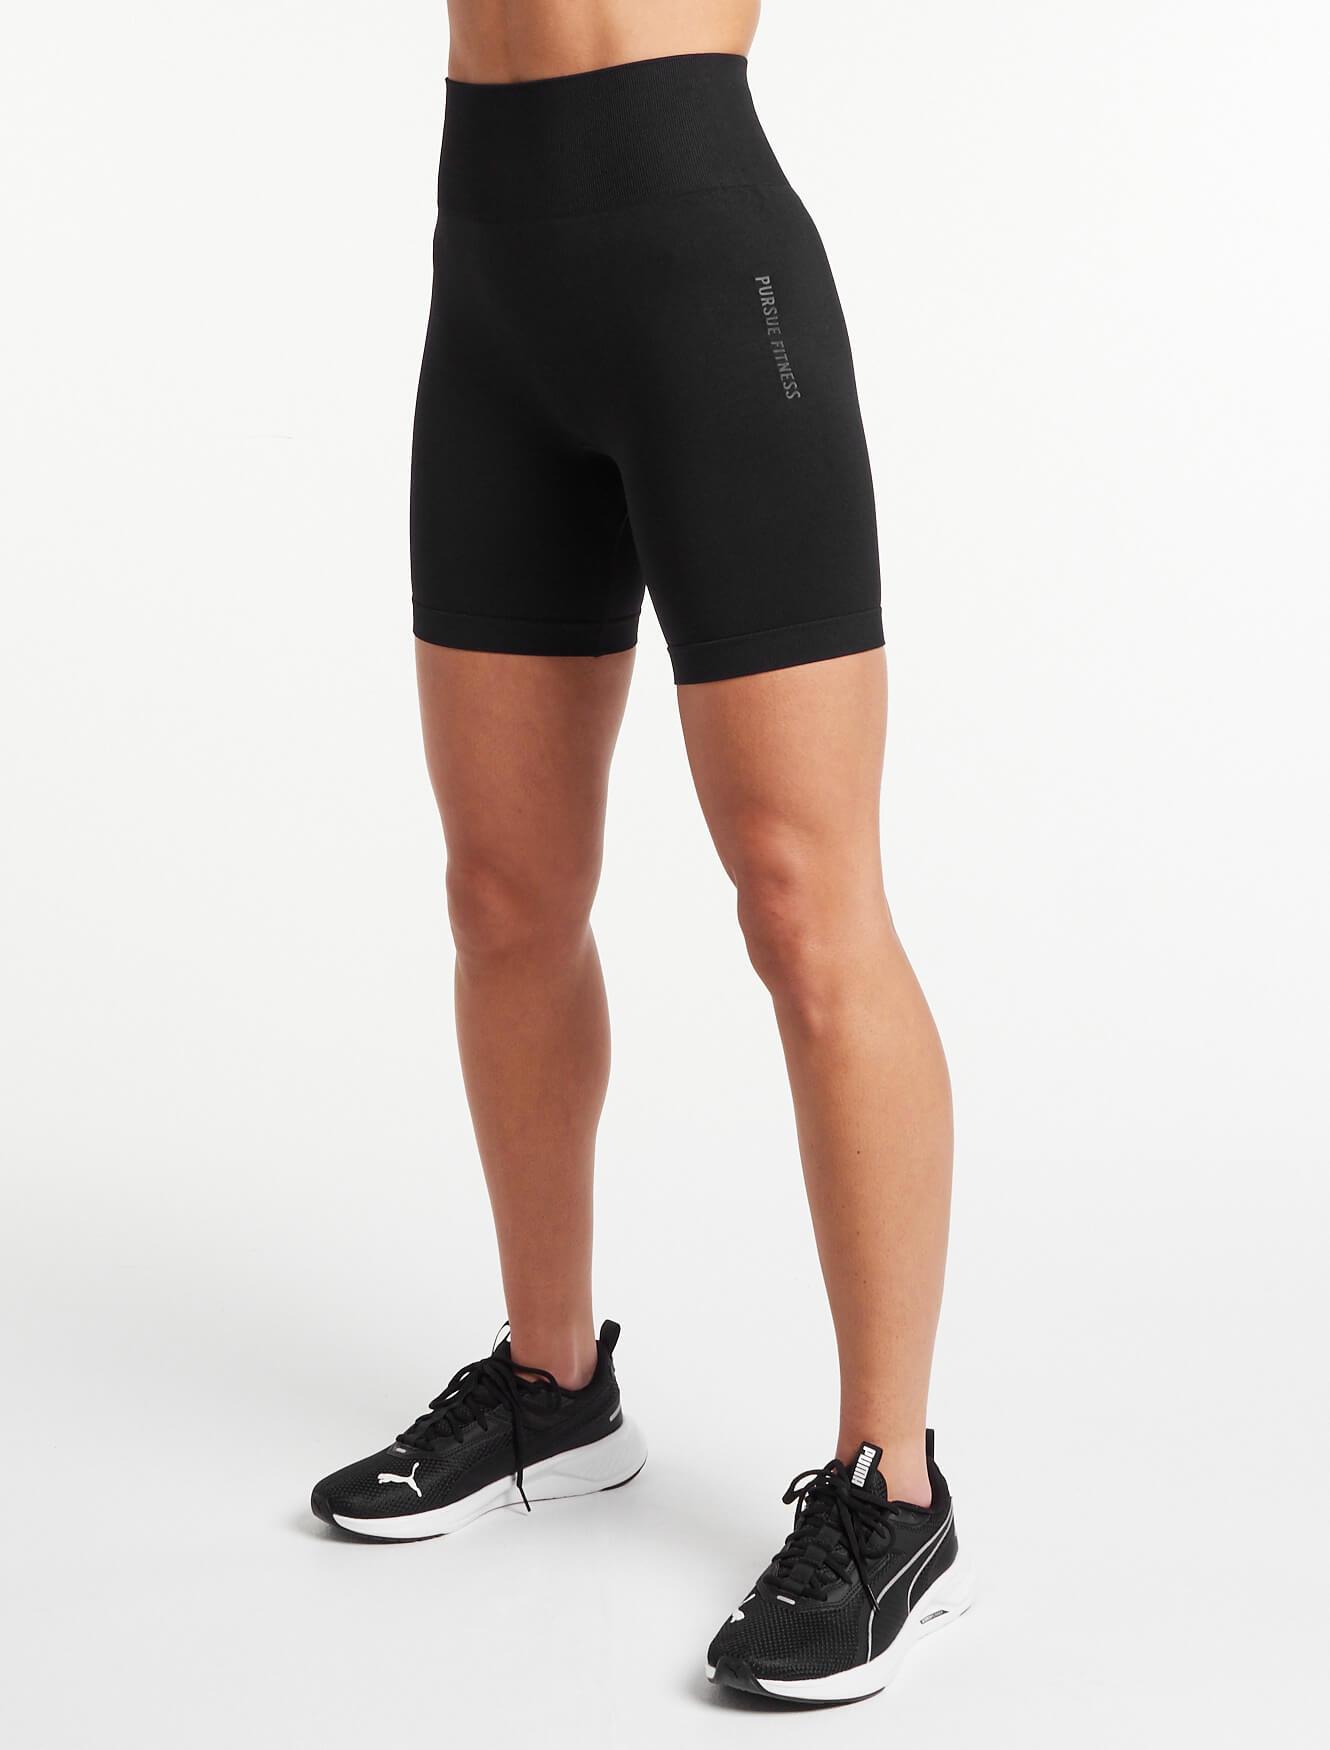 Afterglow Seamless Shorts / Blackout Pursue Fitness 4